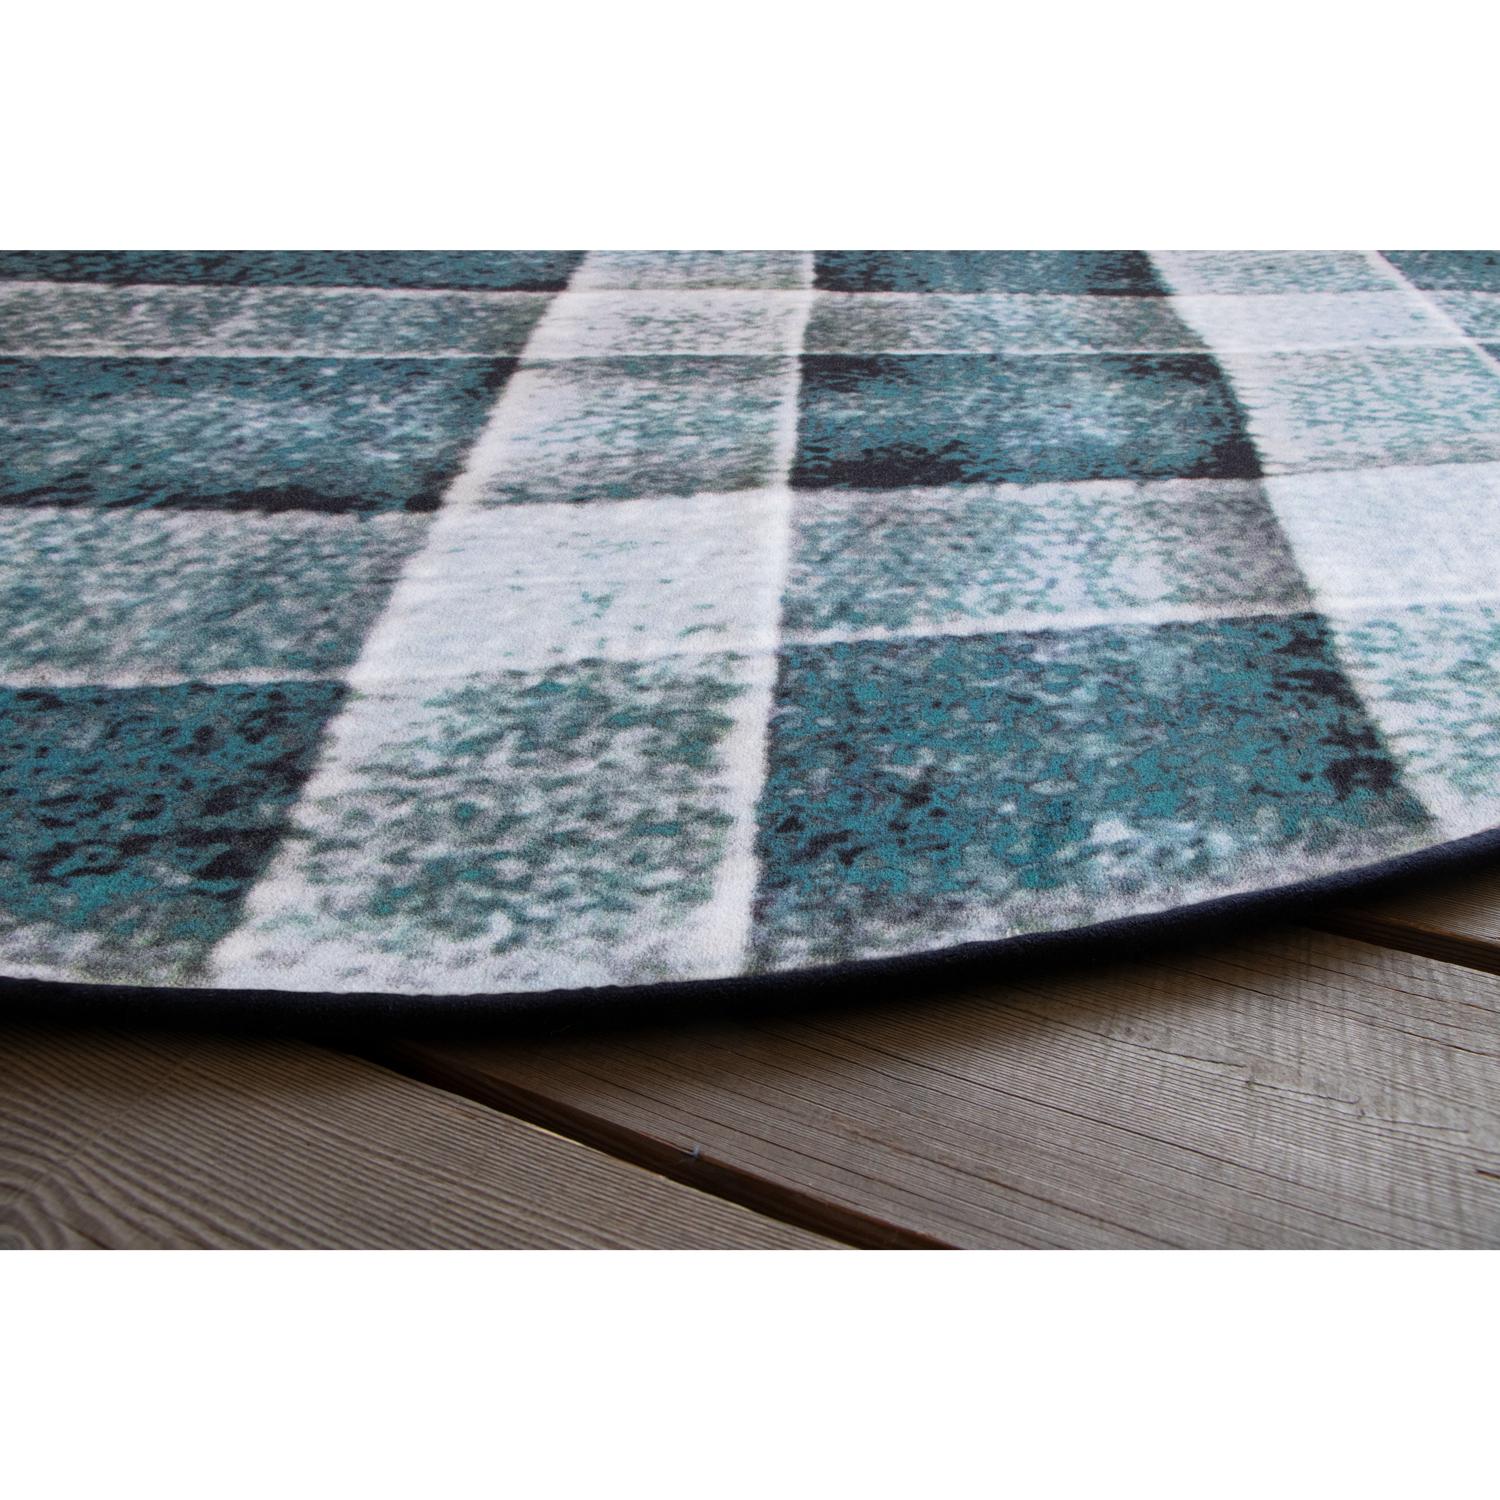 Italian 21st Cent Squared Organic Shape Green Rug by Deanna Comellini In Stock 190x200cm For Sale